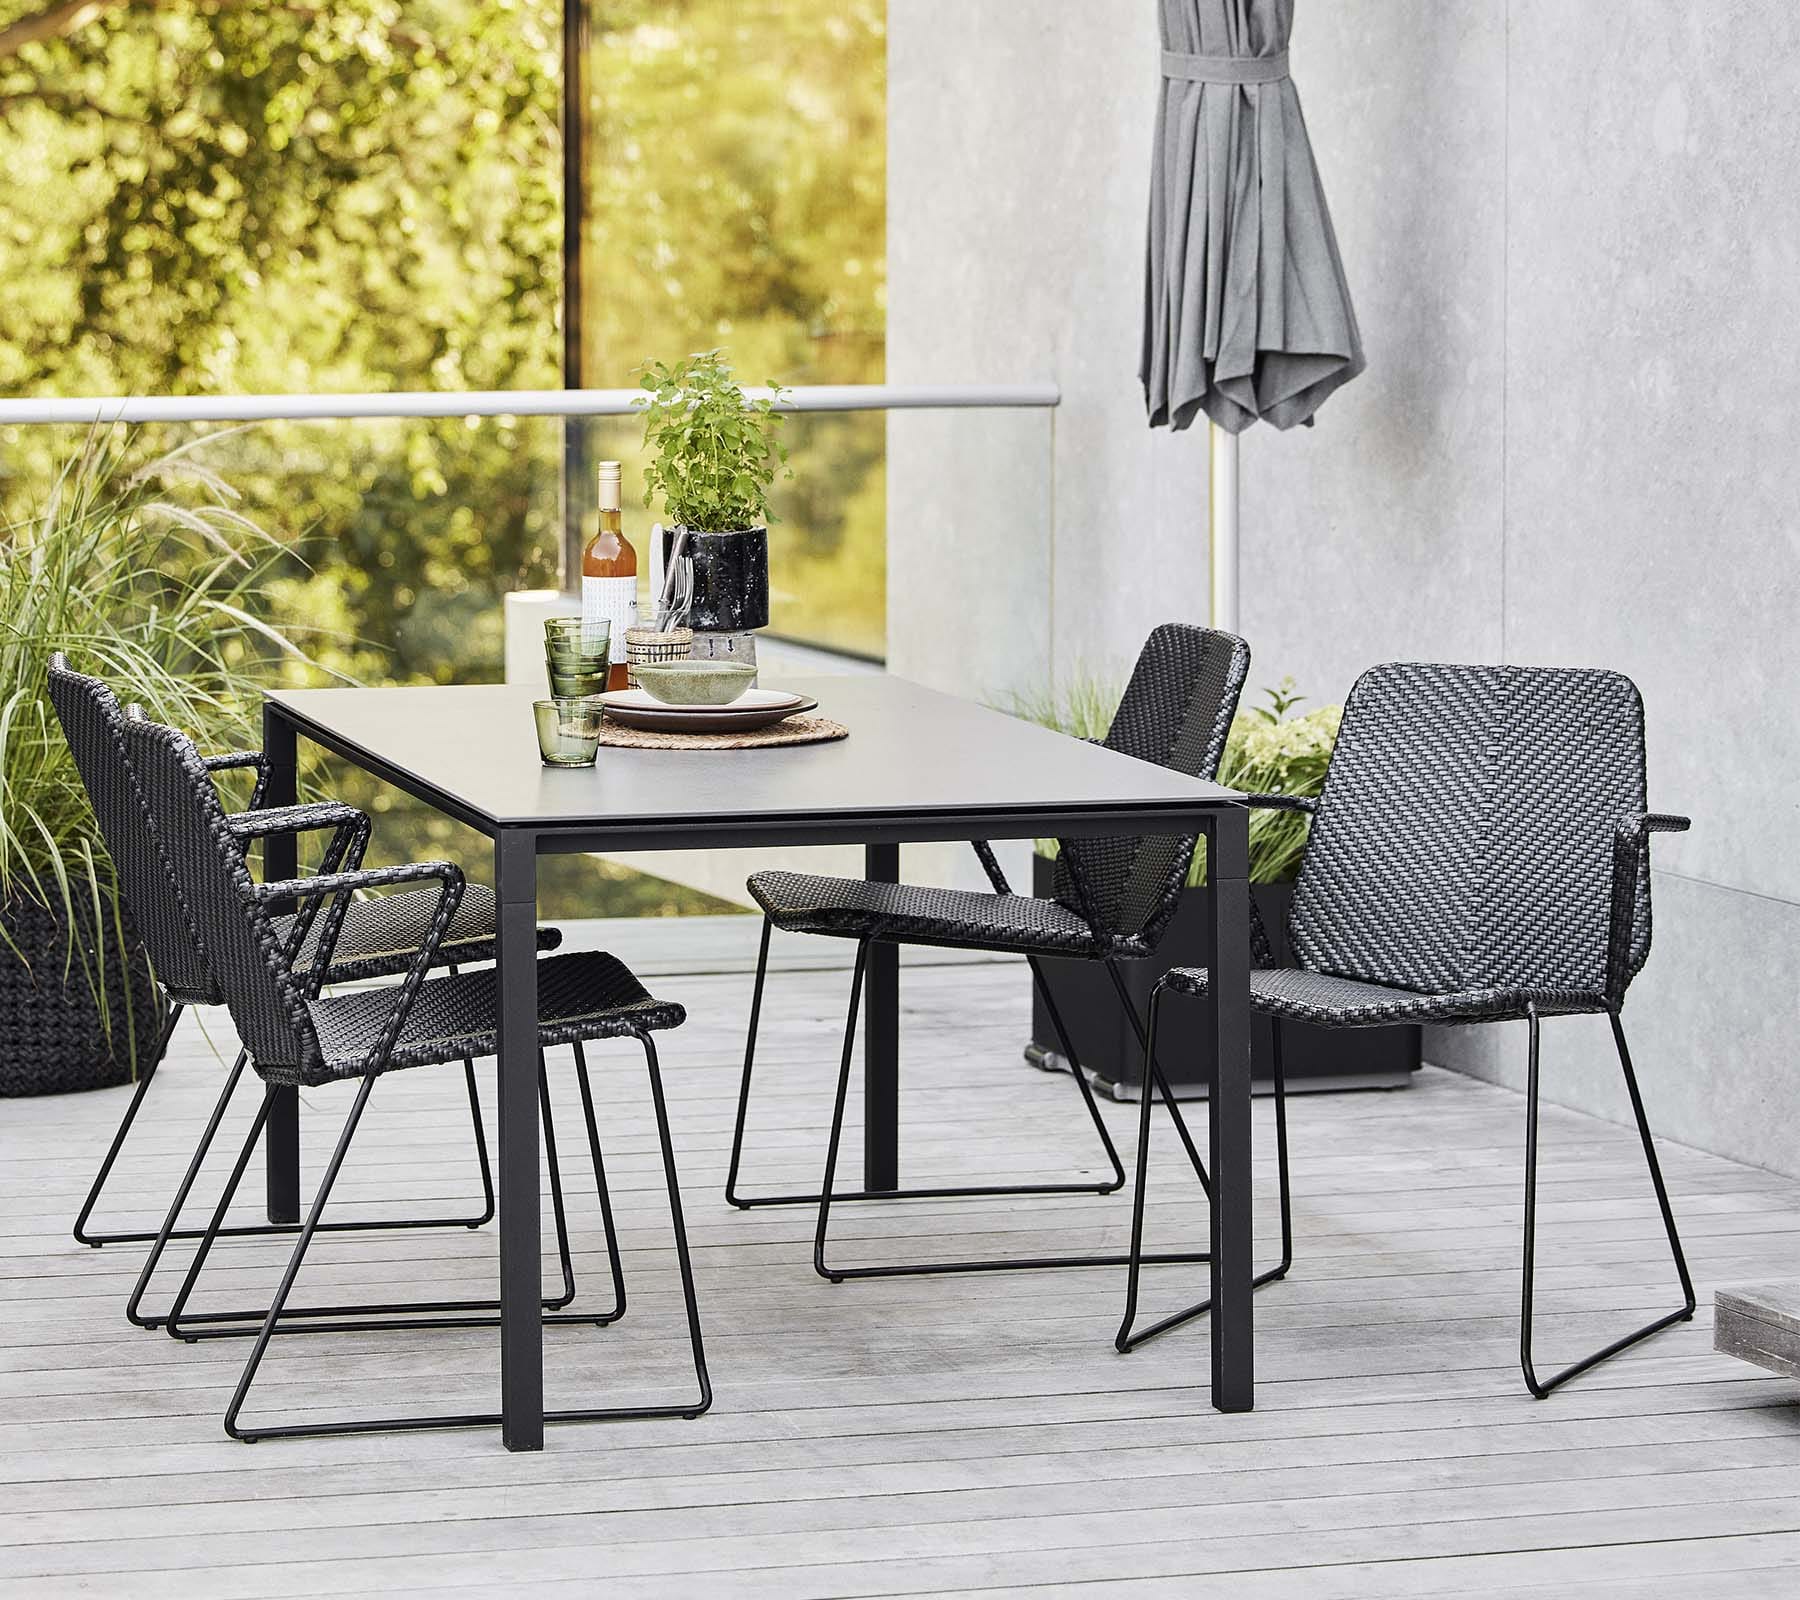 Boxhill's Vision black outdoor dining chair with dark grey outdoor dining table placed on balcony